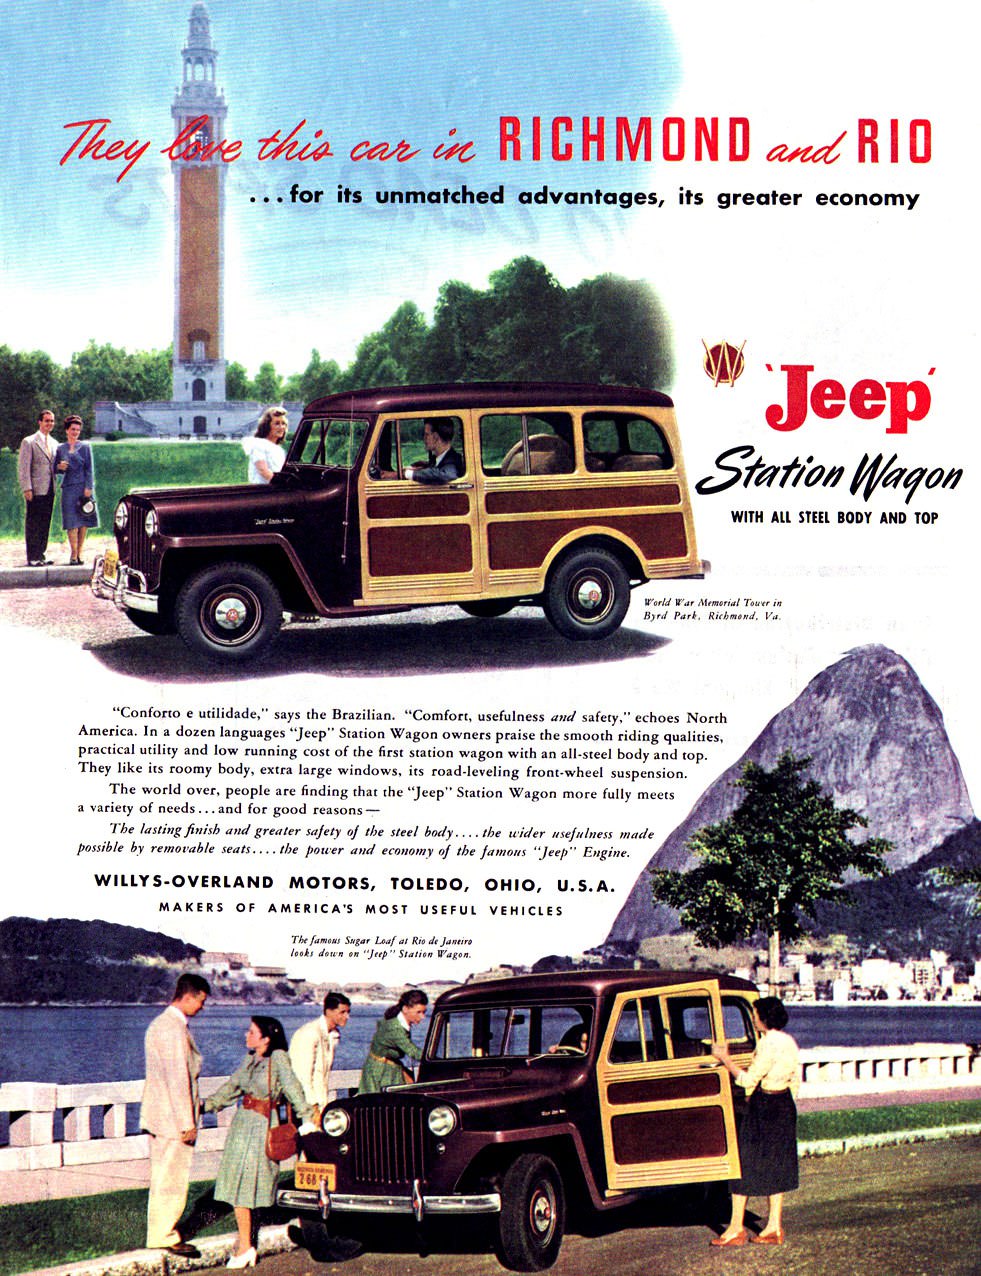 The Iconic 1949 Willys Jeep Station Wagon: Driving Back in Time with Vintage Adverts